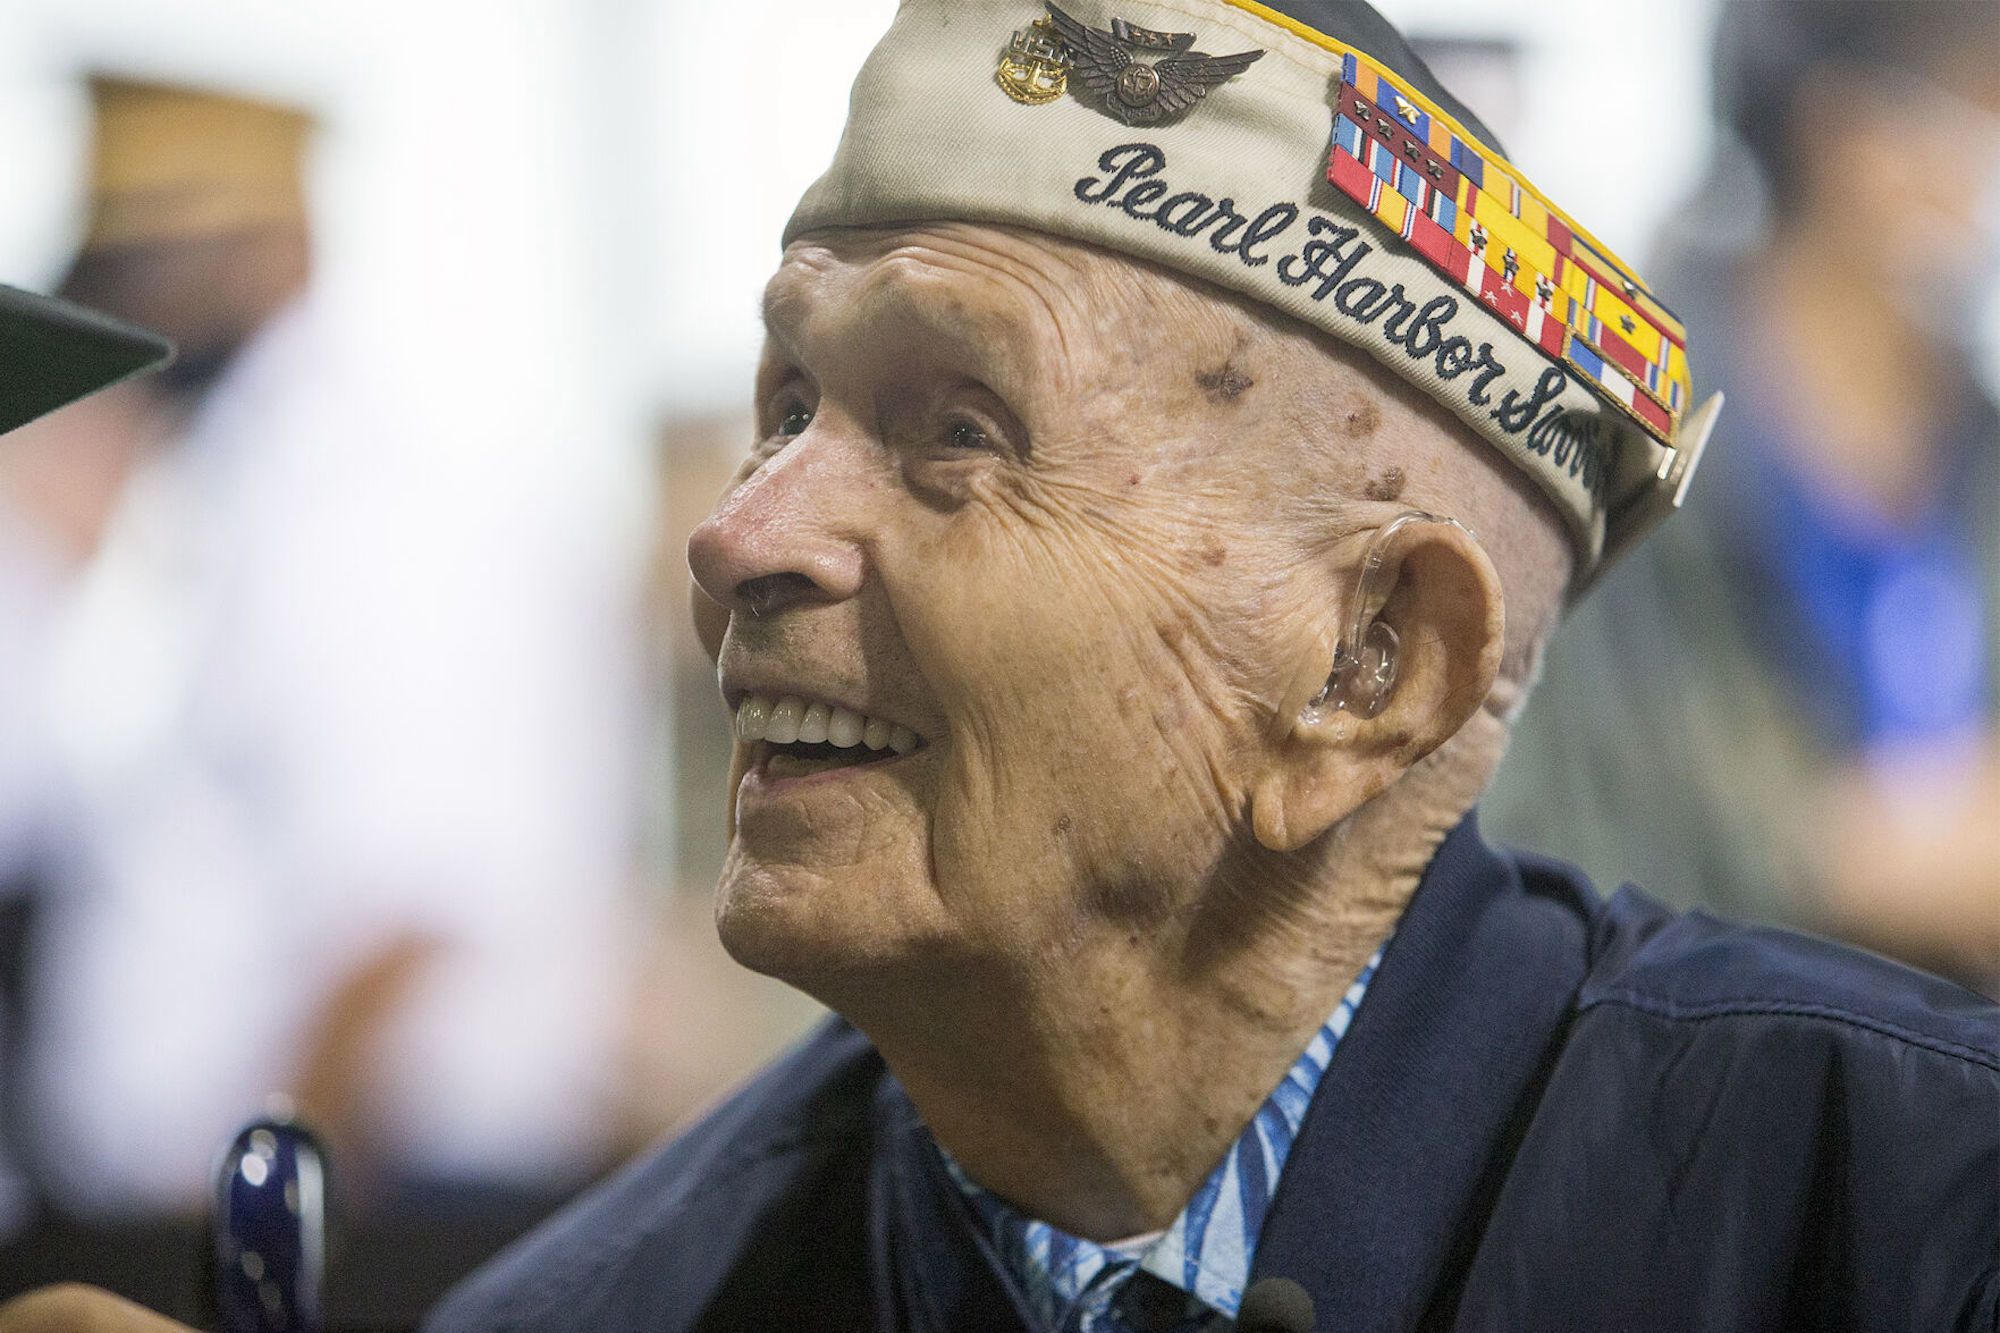 Richard C. “Dick” Higgins attends the Pearl Harbor 80th Anniversary Commemorative Ceremony at Pearl Harbor, Hawaii, on December 7, 2021.